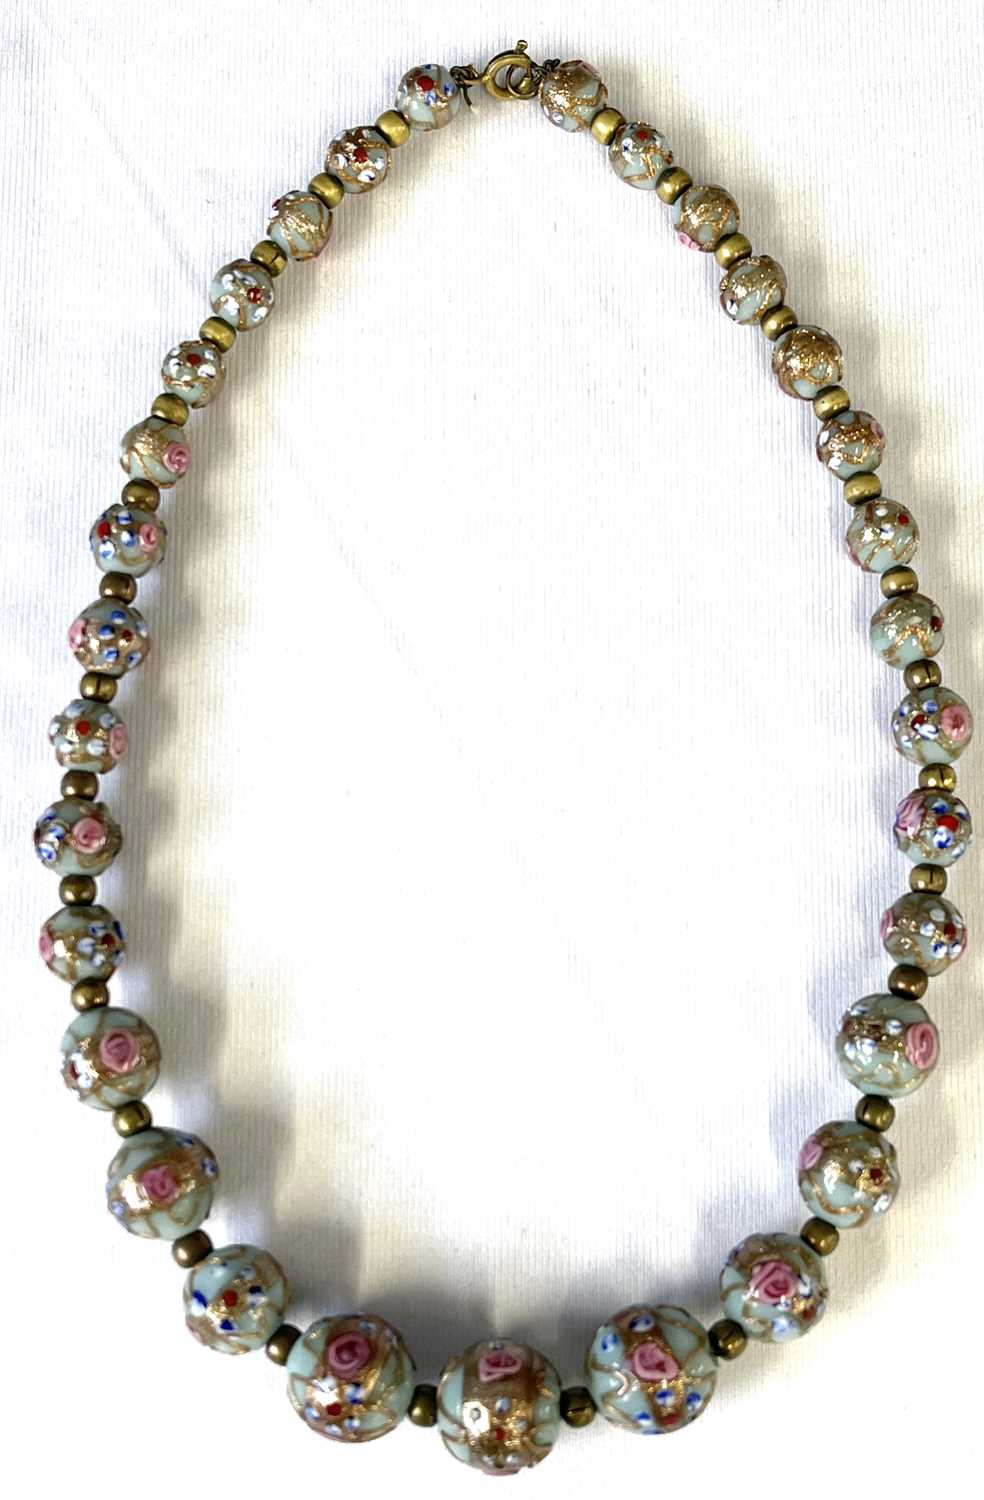 A 1950's graduated Murano glass bead necklace with hand painted floral patterns on aqua ground - Image 2 of 4